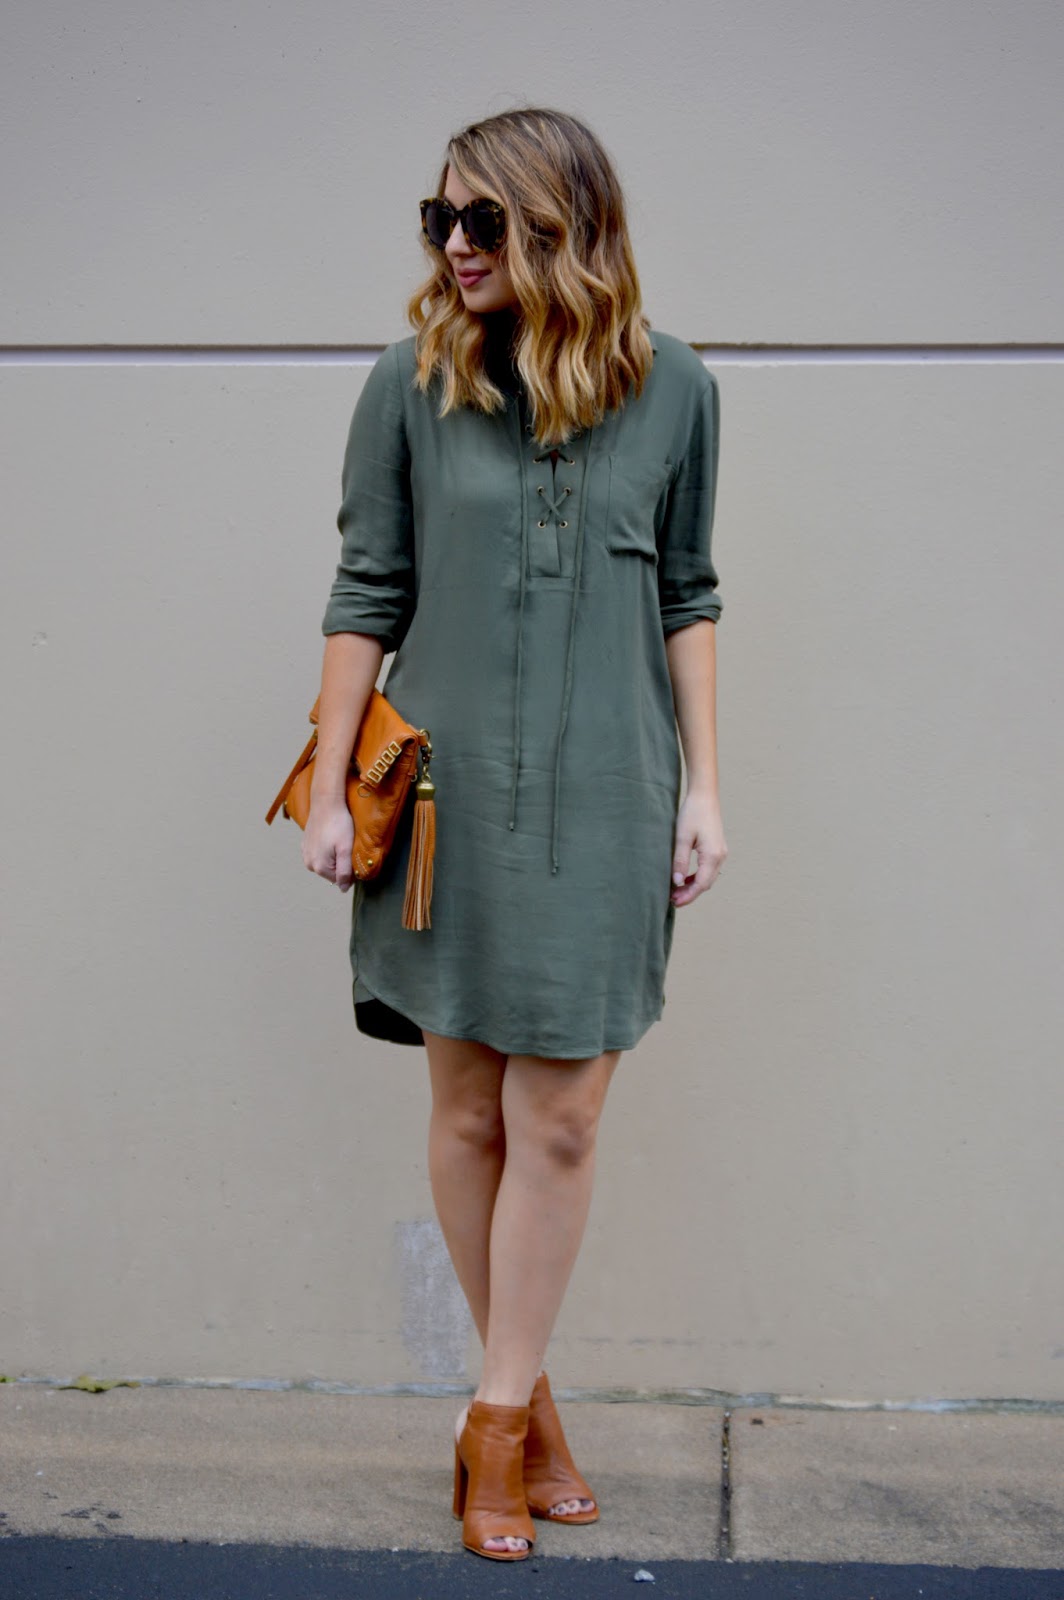 Rosy Outlook: The Dress You Need for Fall + Exciting News!